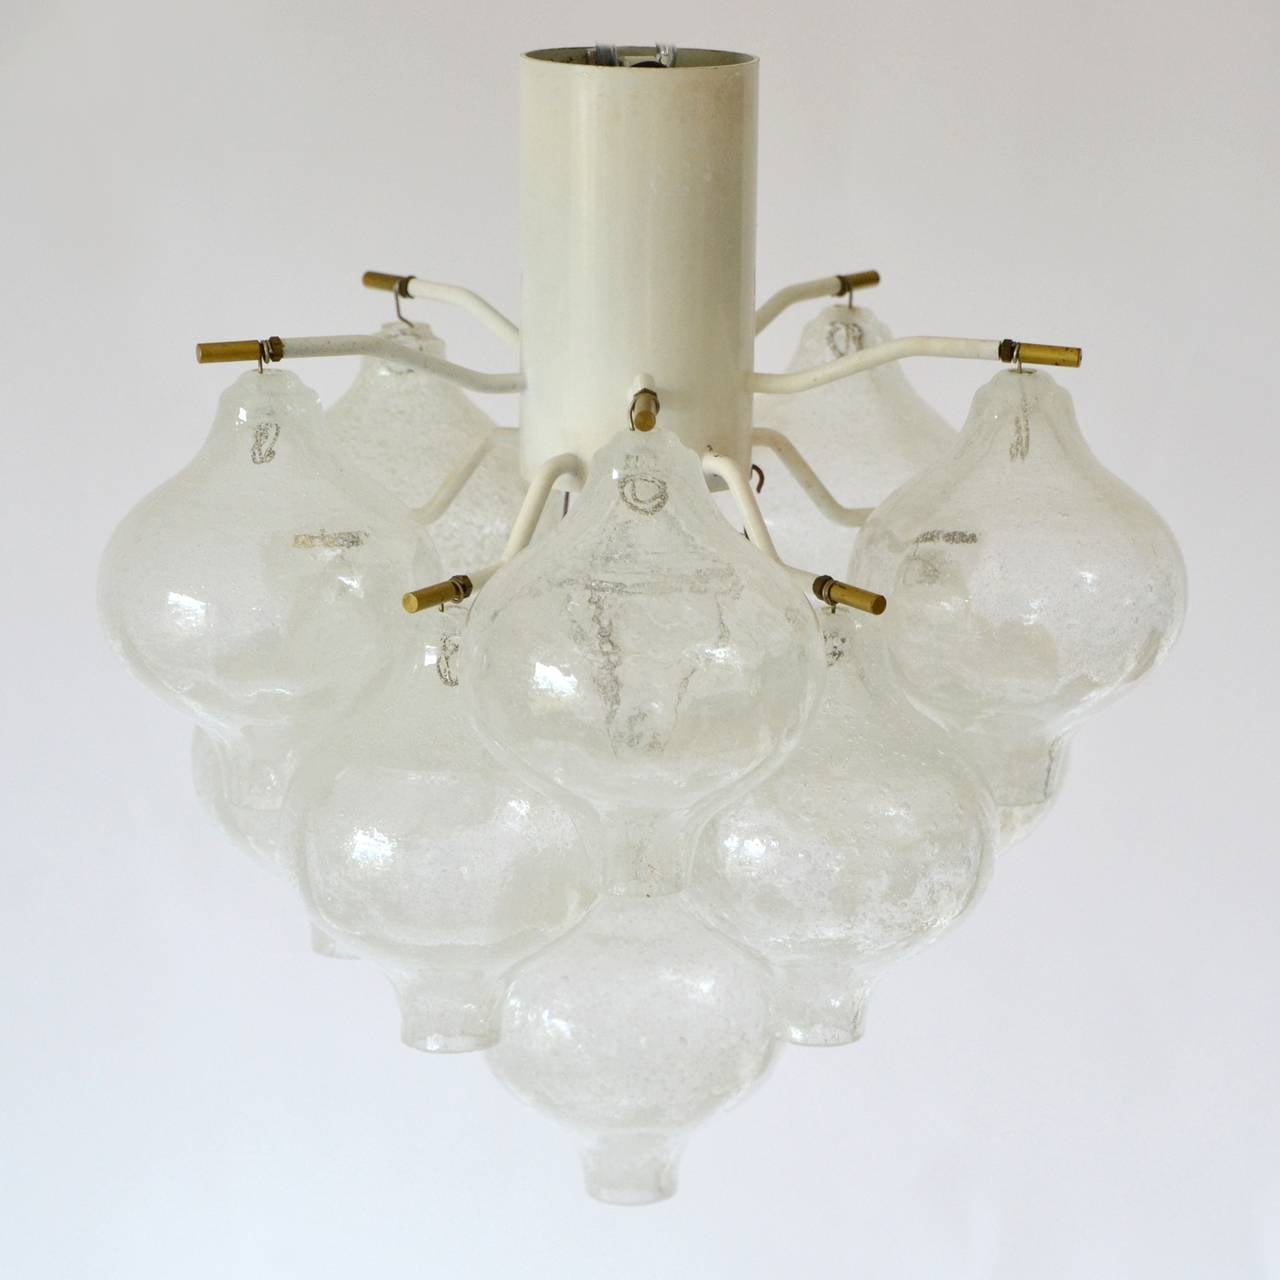 Glass light fixture by J.T. Kalmar from the 1960s. The hardware is made of brass and white lacquered metal. It holds 11 handblown glasses and has one socket for a E27 bulb.

We ship worldwide.